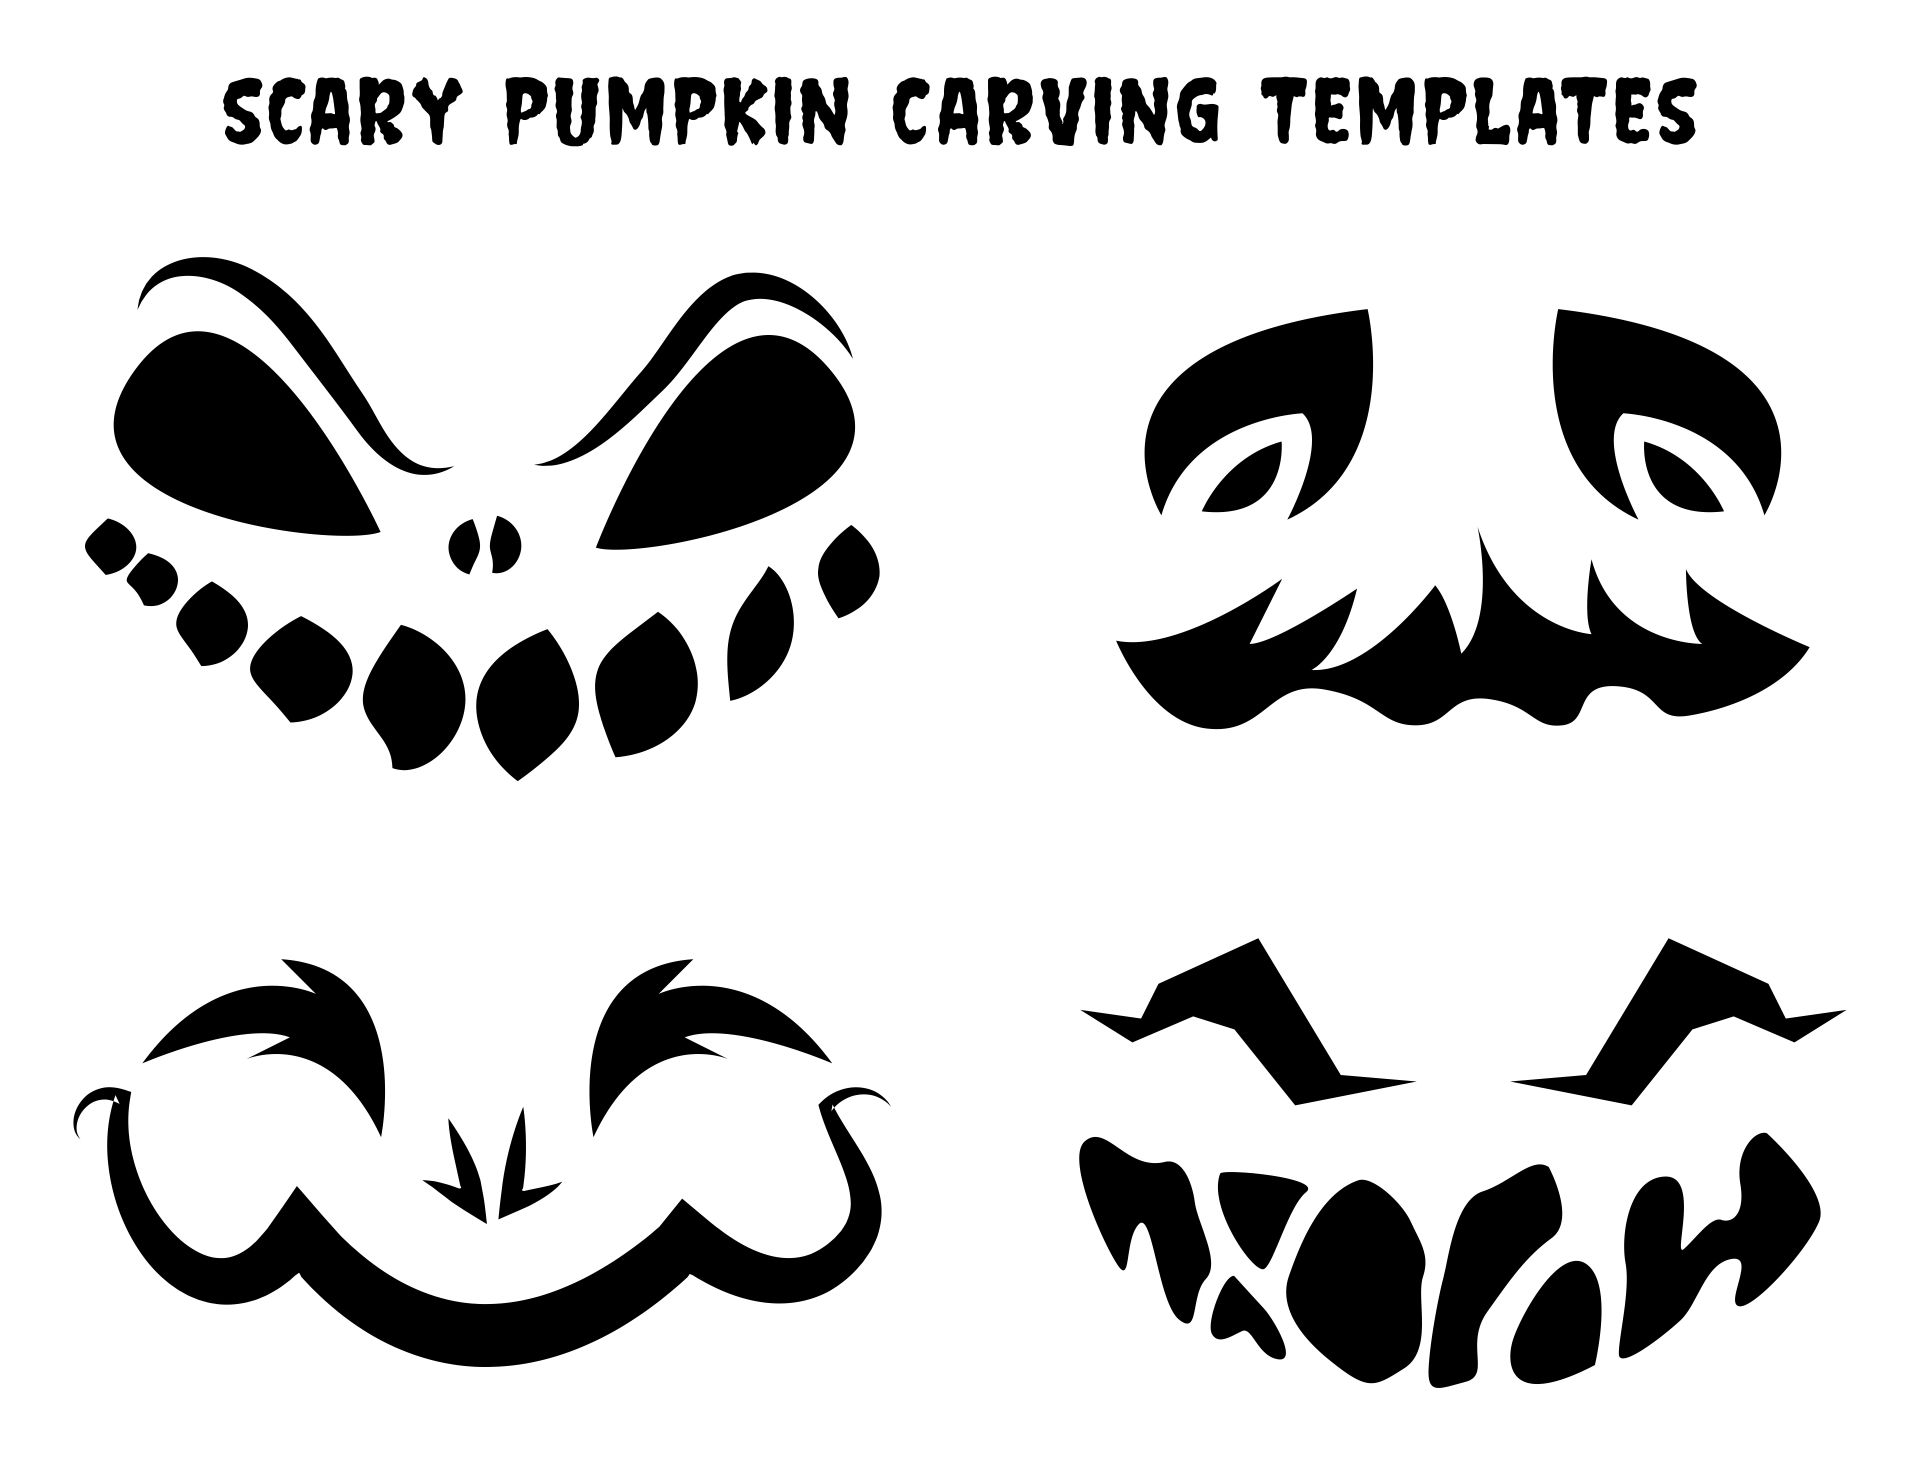 6 Best Scary Pumpkin Carving Templates Printables PDF for Free at ...